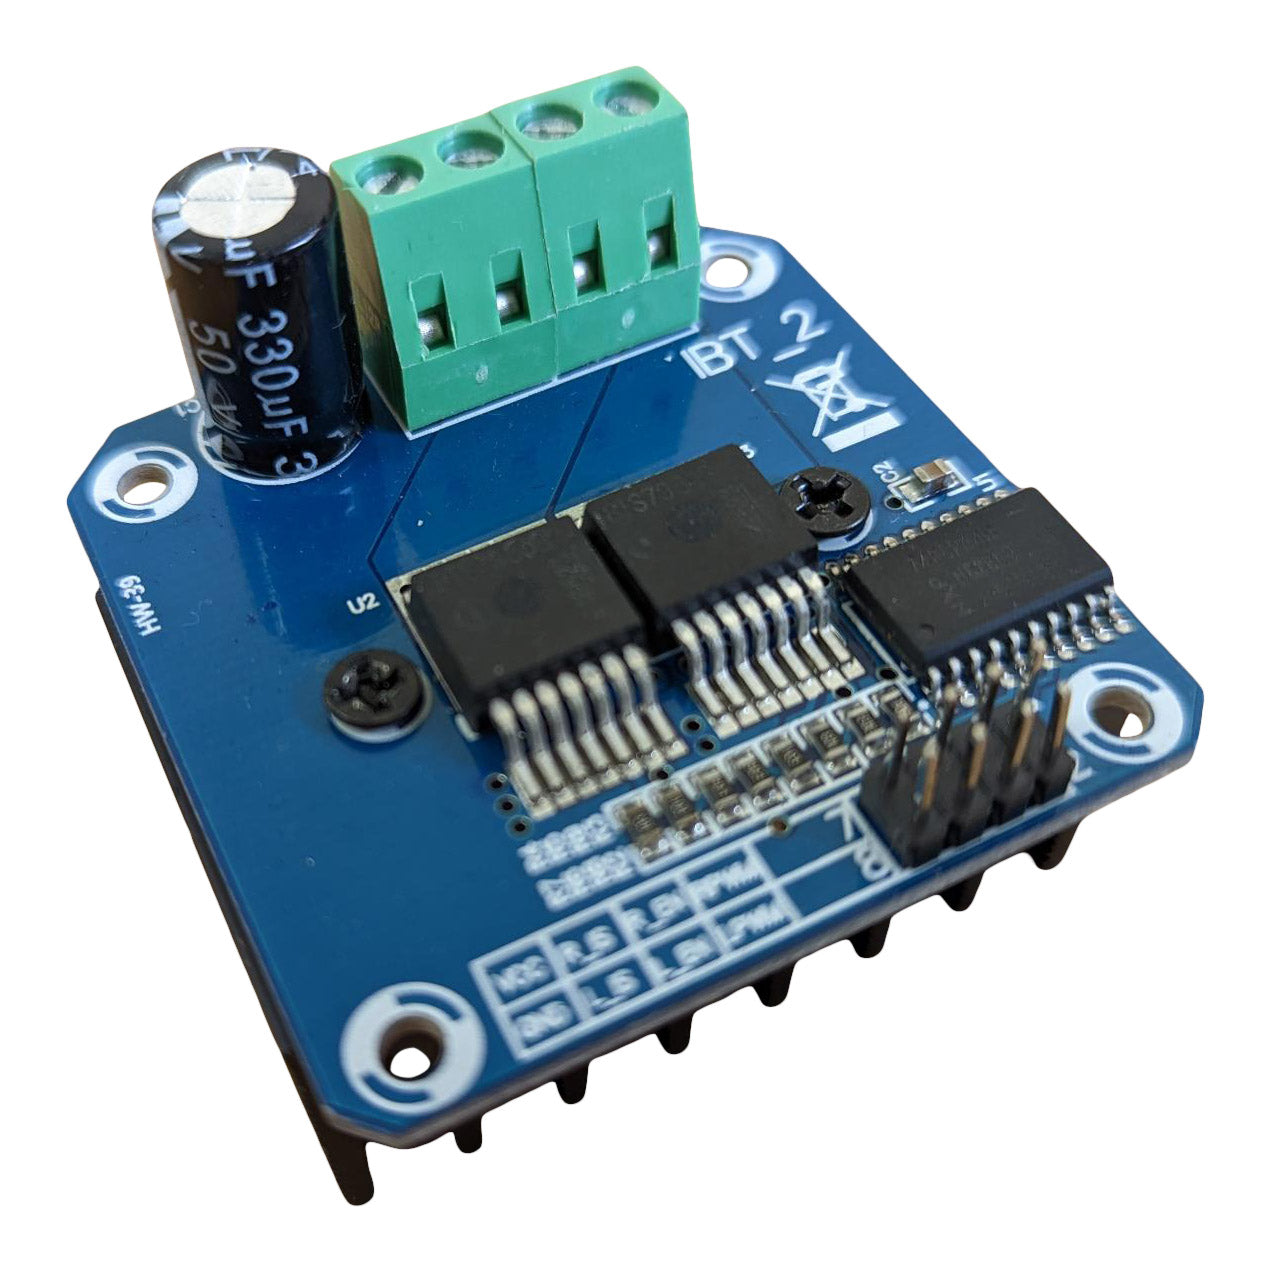 High Current DC Motor Drive - 43A Product Image